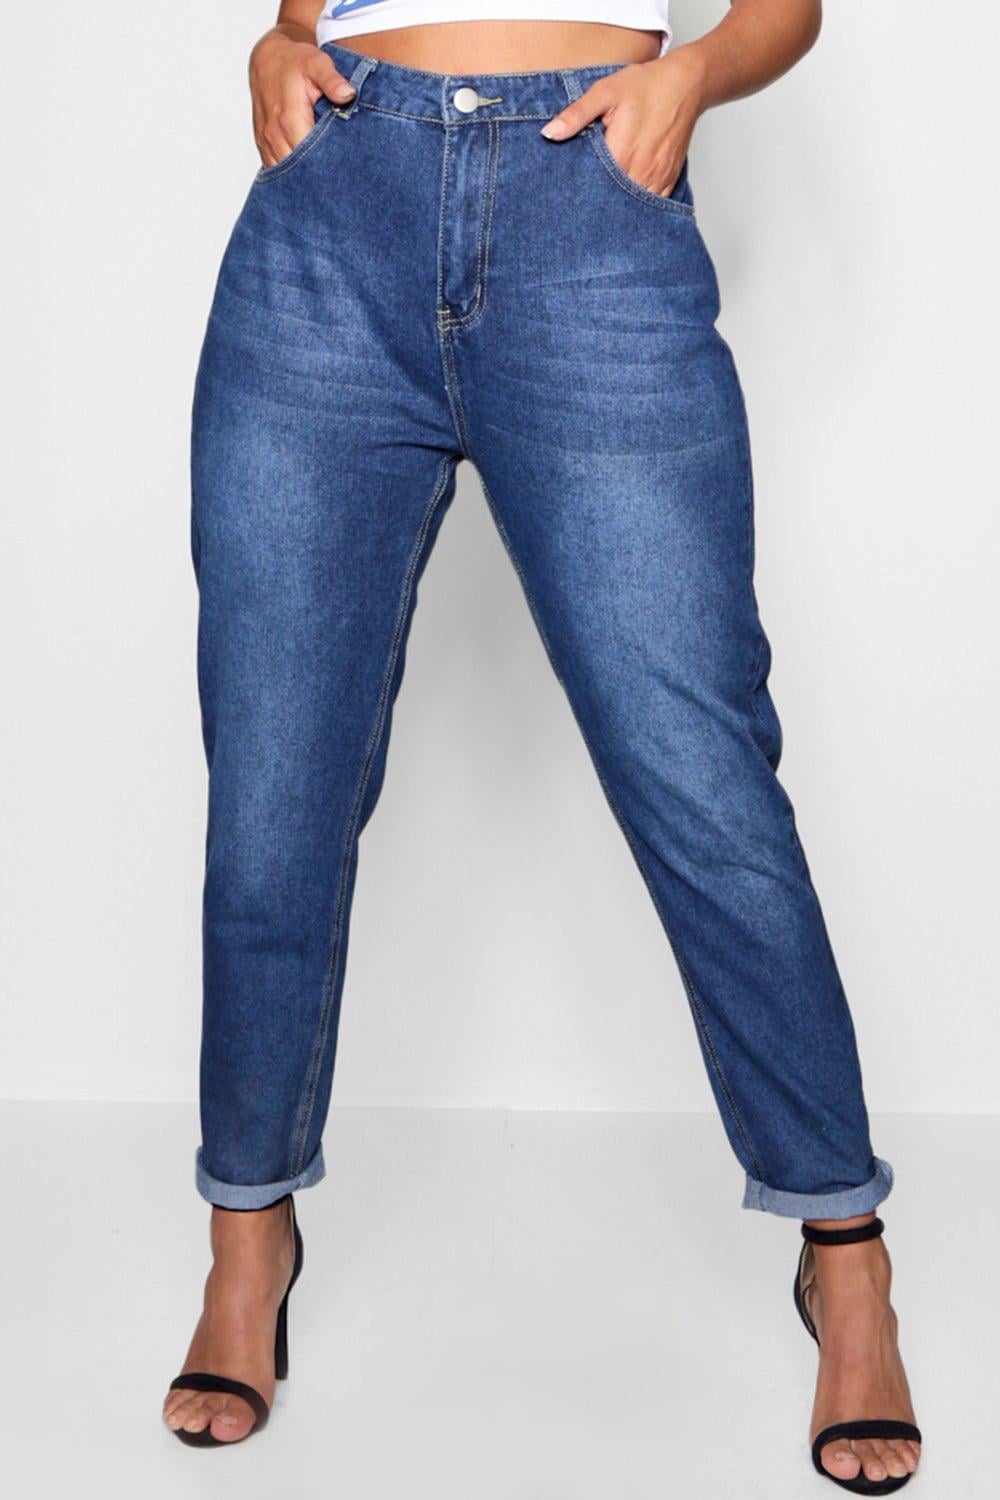 best rated jeans for curvy figure